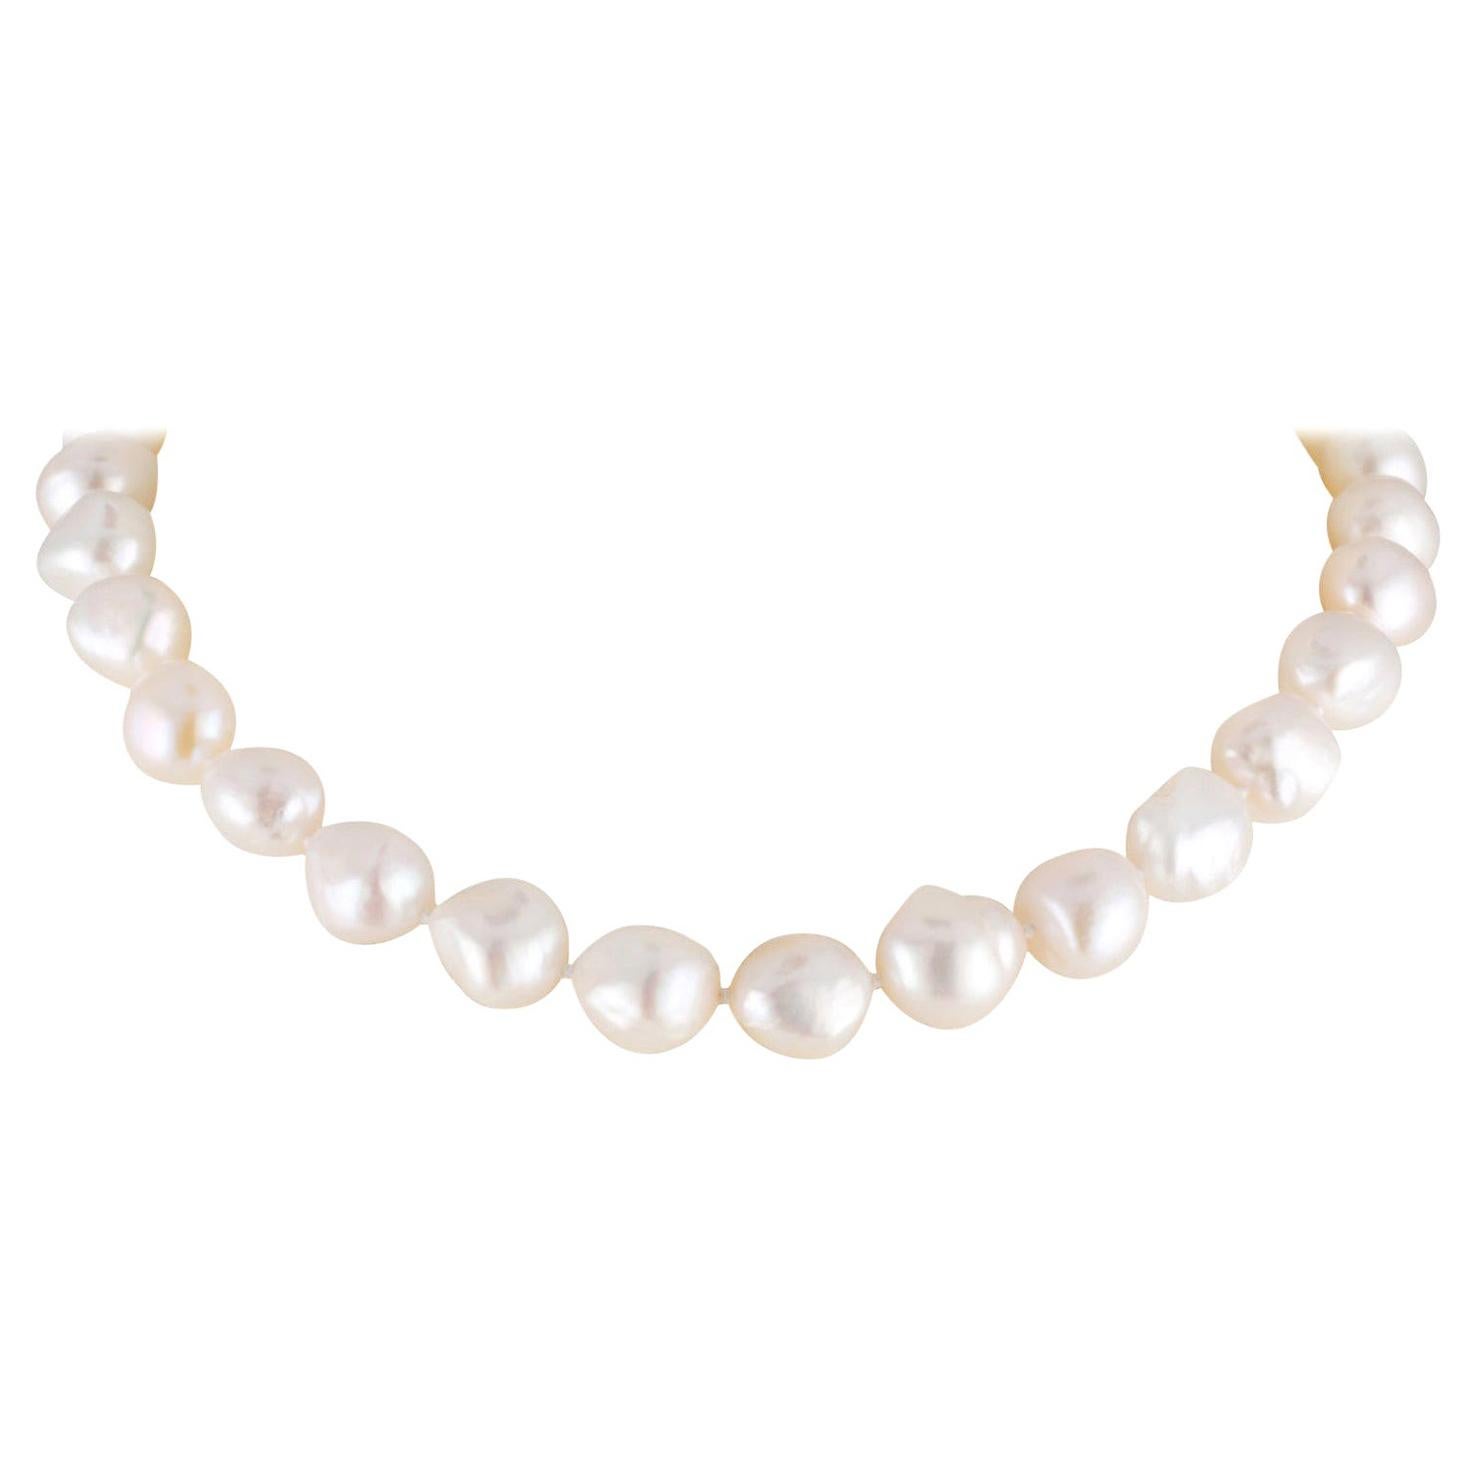 Freshwater White Cultured Pearl Baroque Choker Necklace with Silver Color Clasp For Sale